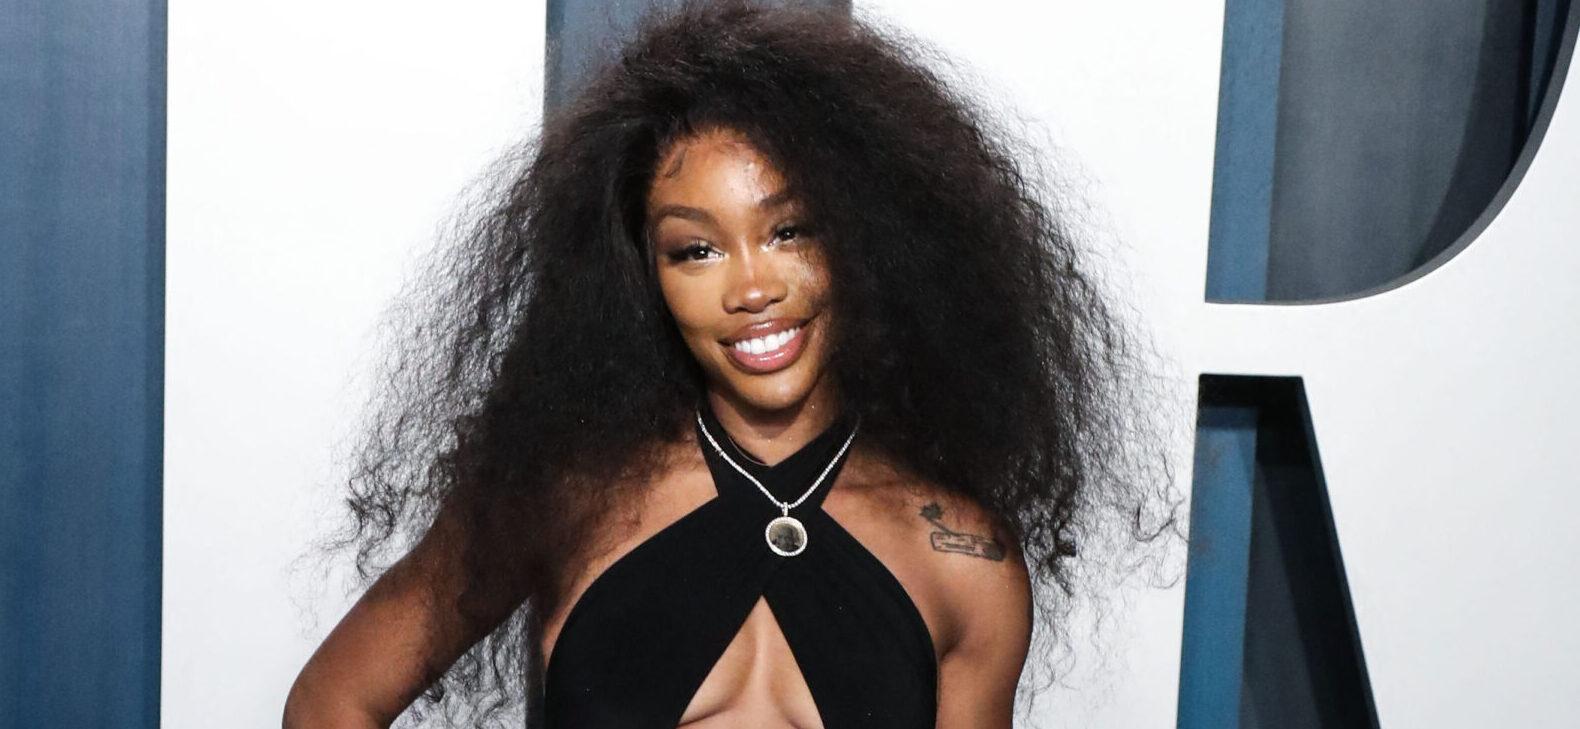 Fans Post ‘Then’ And ‘Now’ Images of SZA After She Denies Getting ‘Facelift’